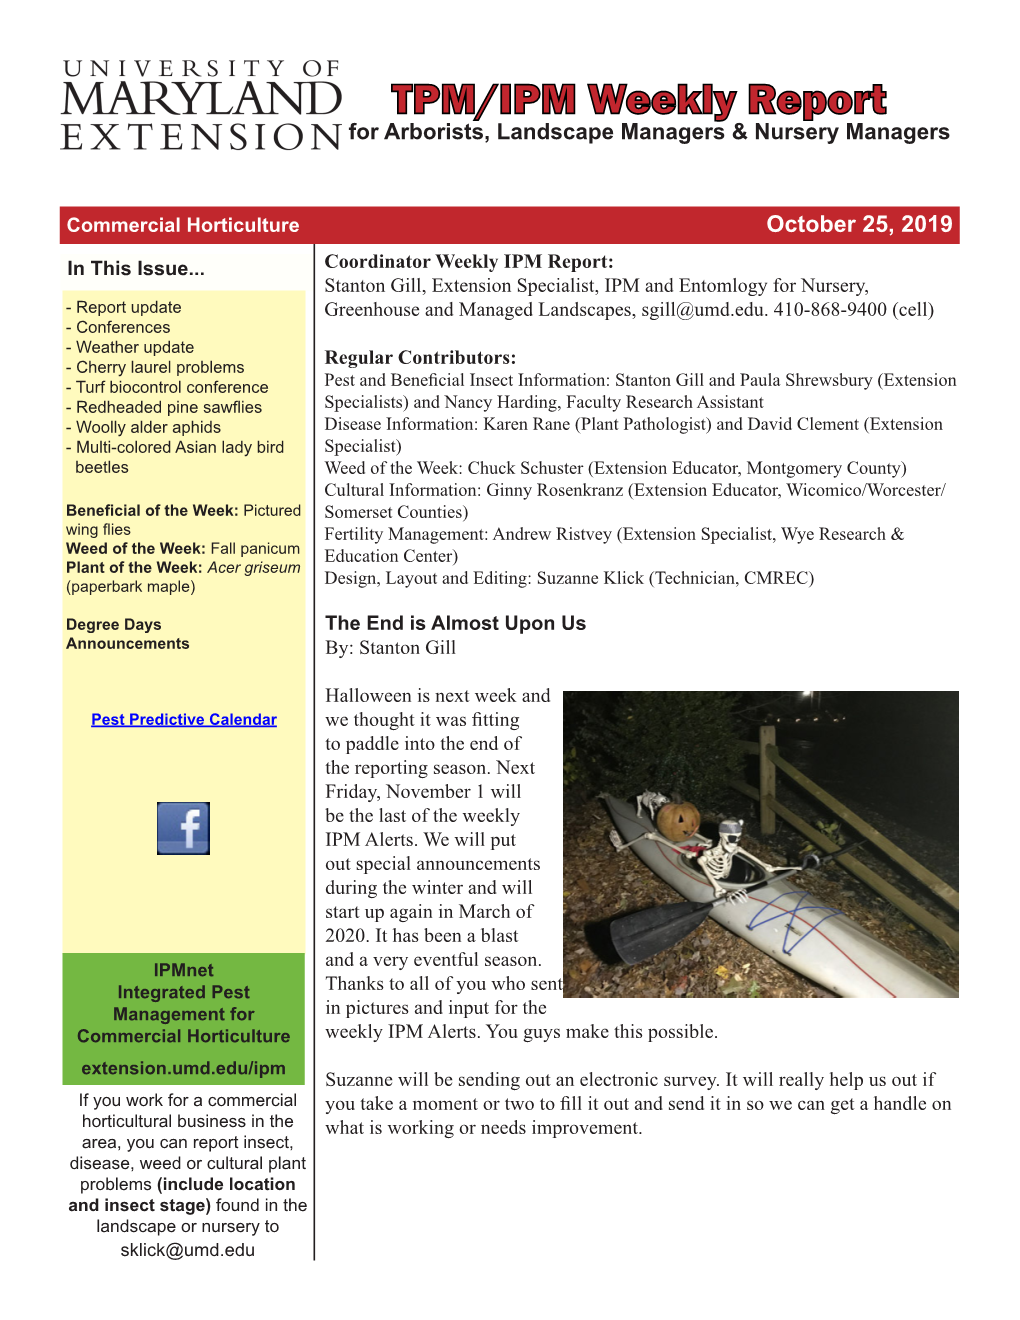 TPM/IPM Weekly Report for Arborists, Landscape Managers & Nursery Managers